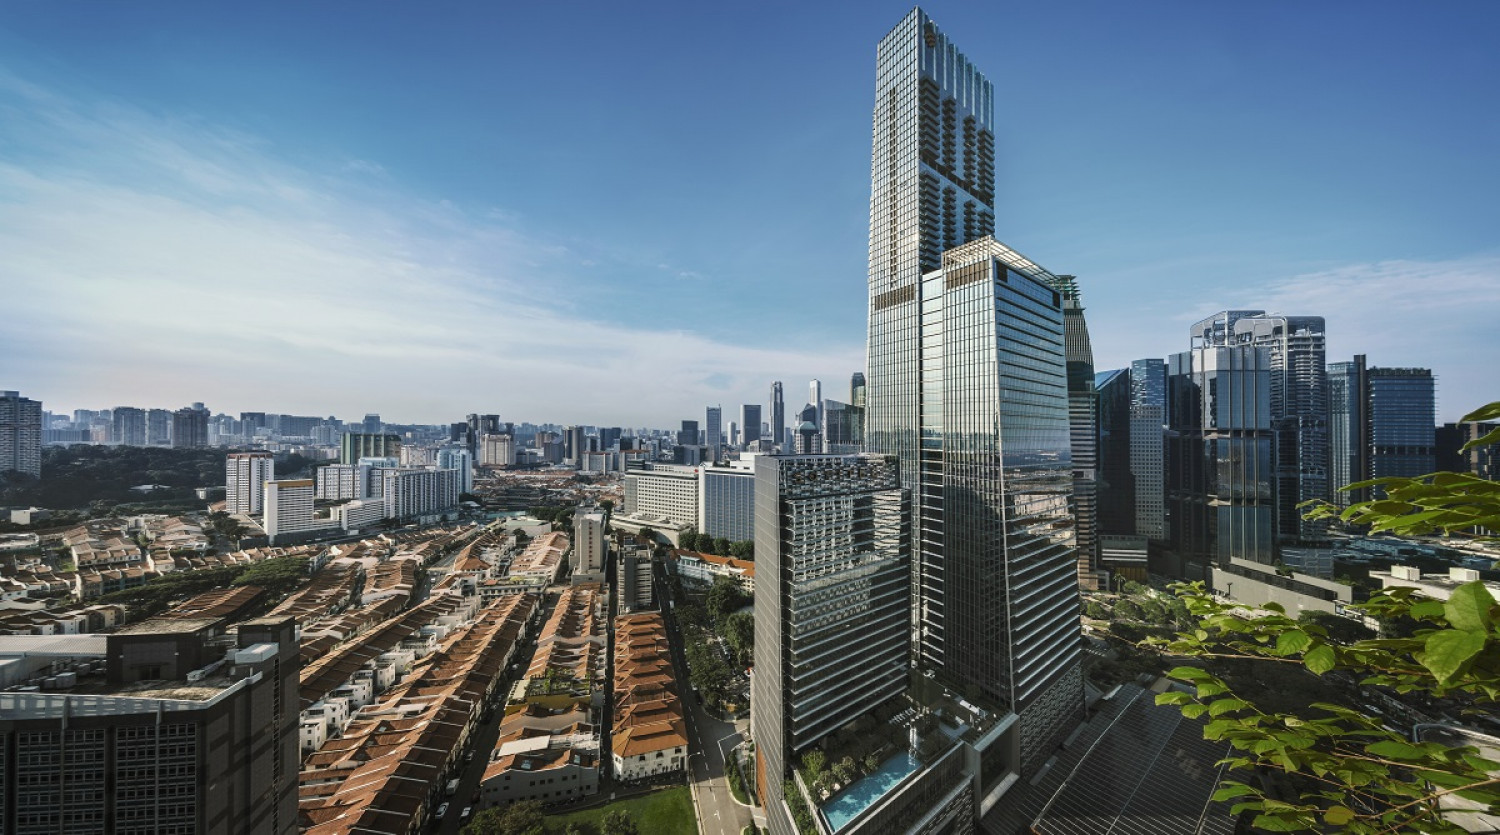 GuocoLand secures $974 mil green facility to refinance Guoco Tower, launches green finance framework - Property News